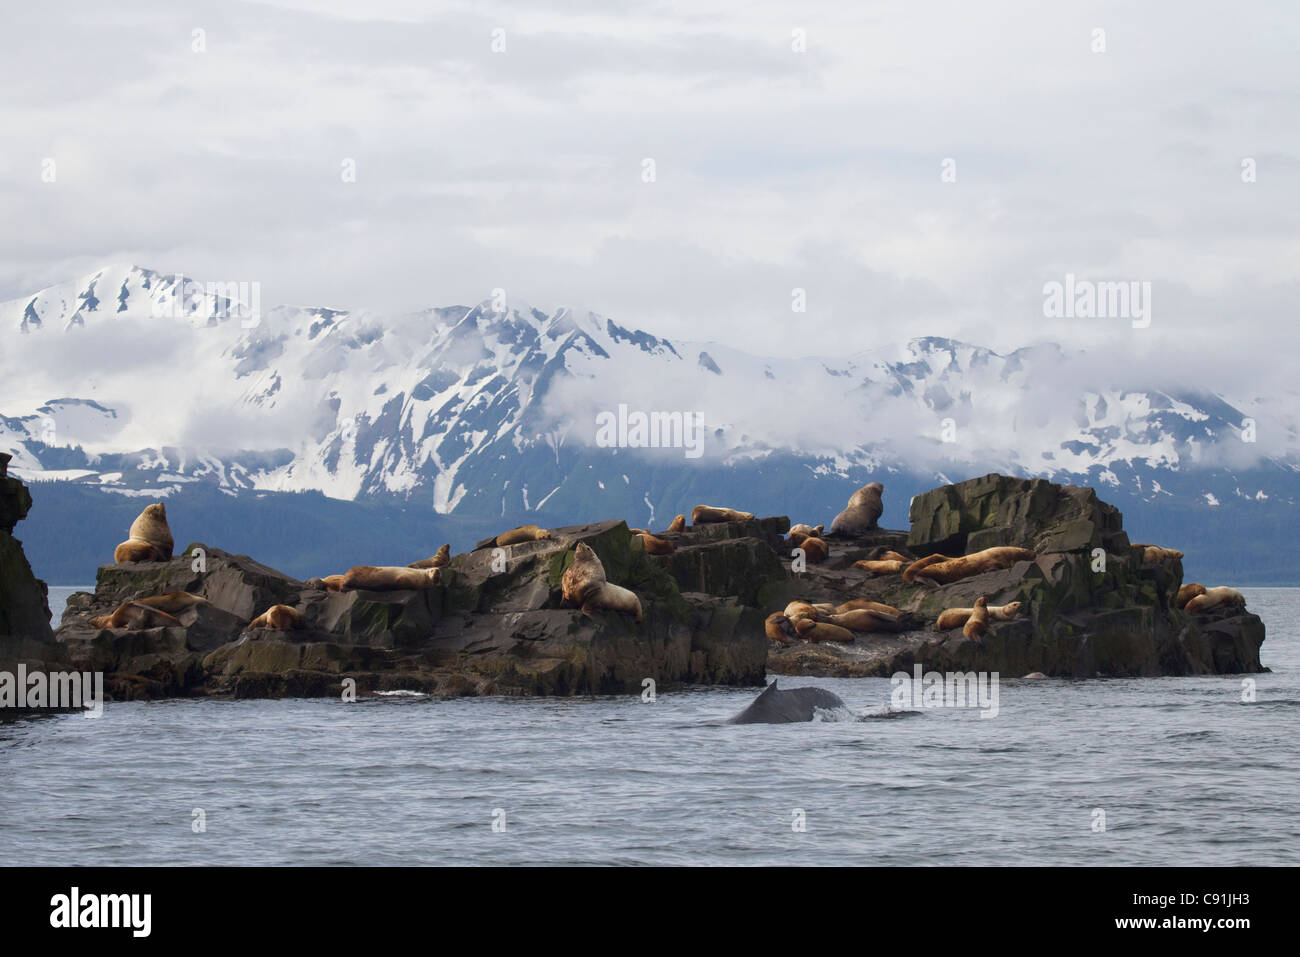 Steller sea lions hauled out at at The Needle with a Humpback whale surfacing in the foreground, Prince William Sound, Alaska Stock Photo